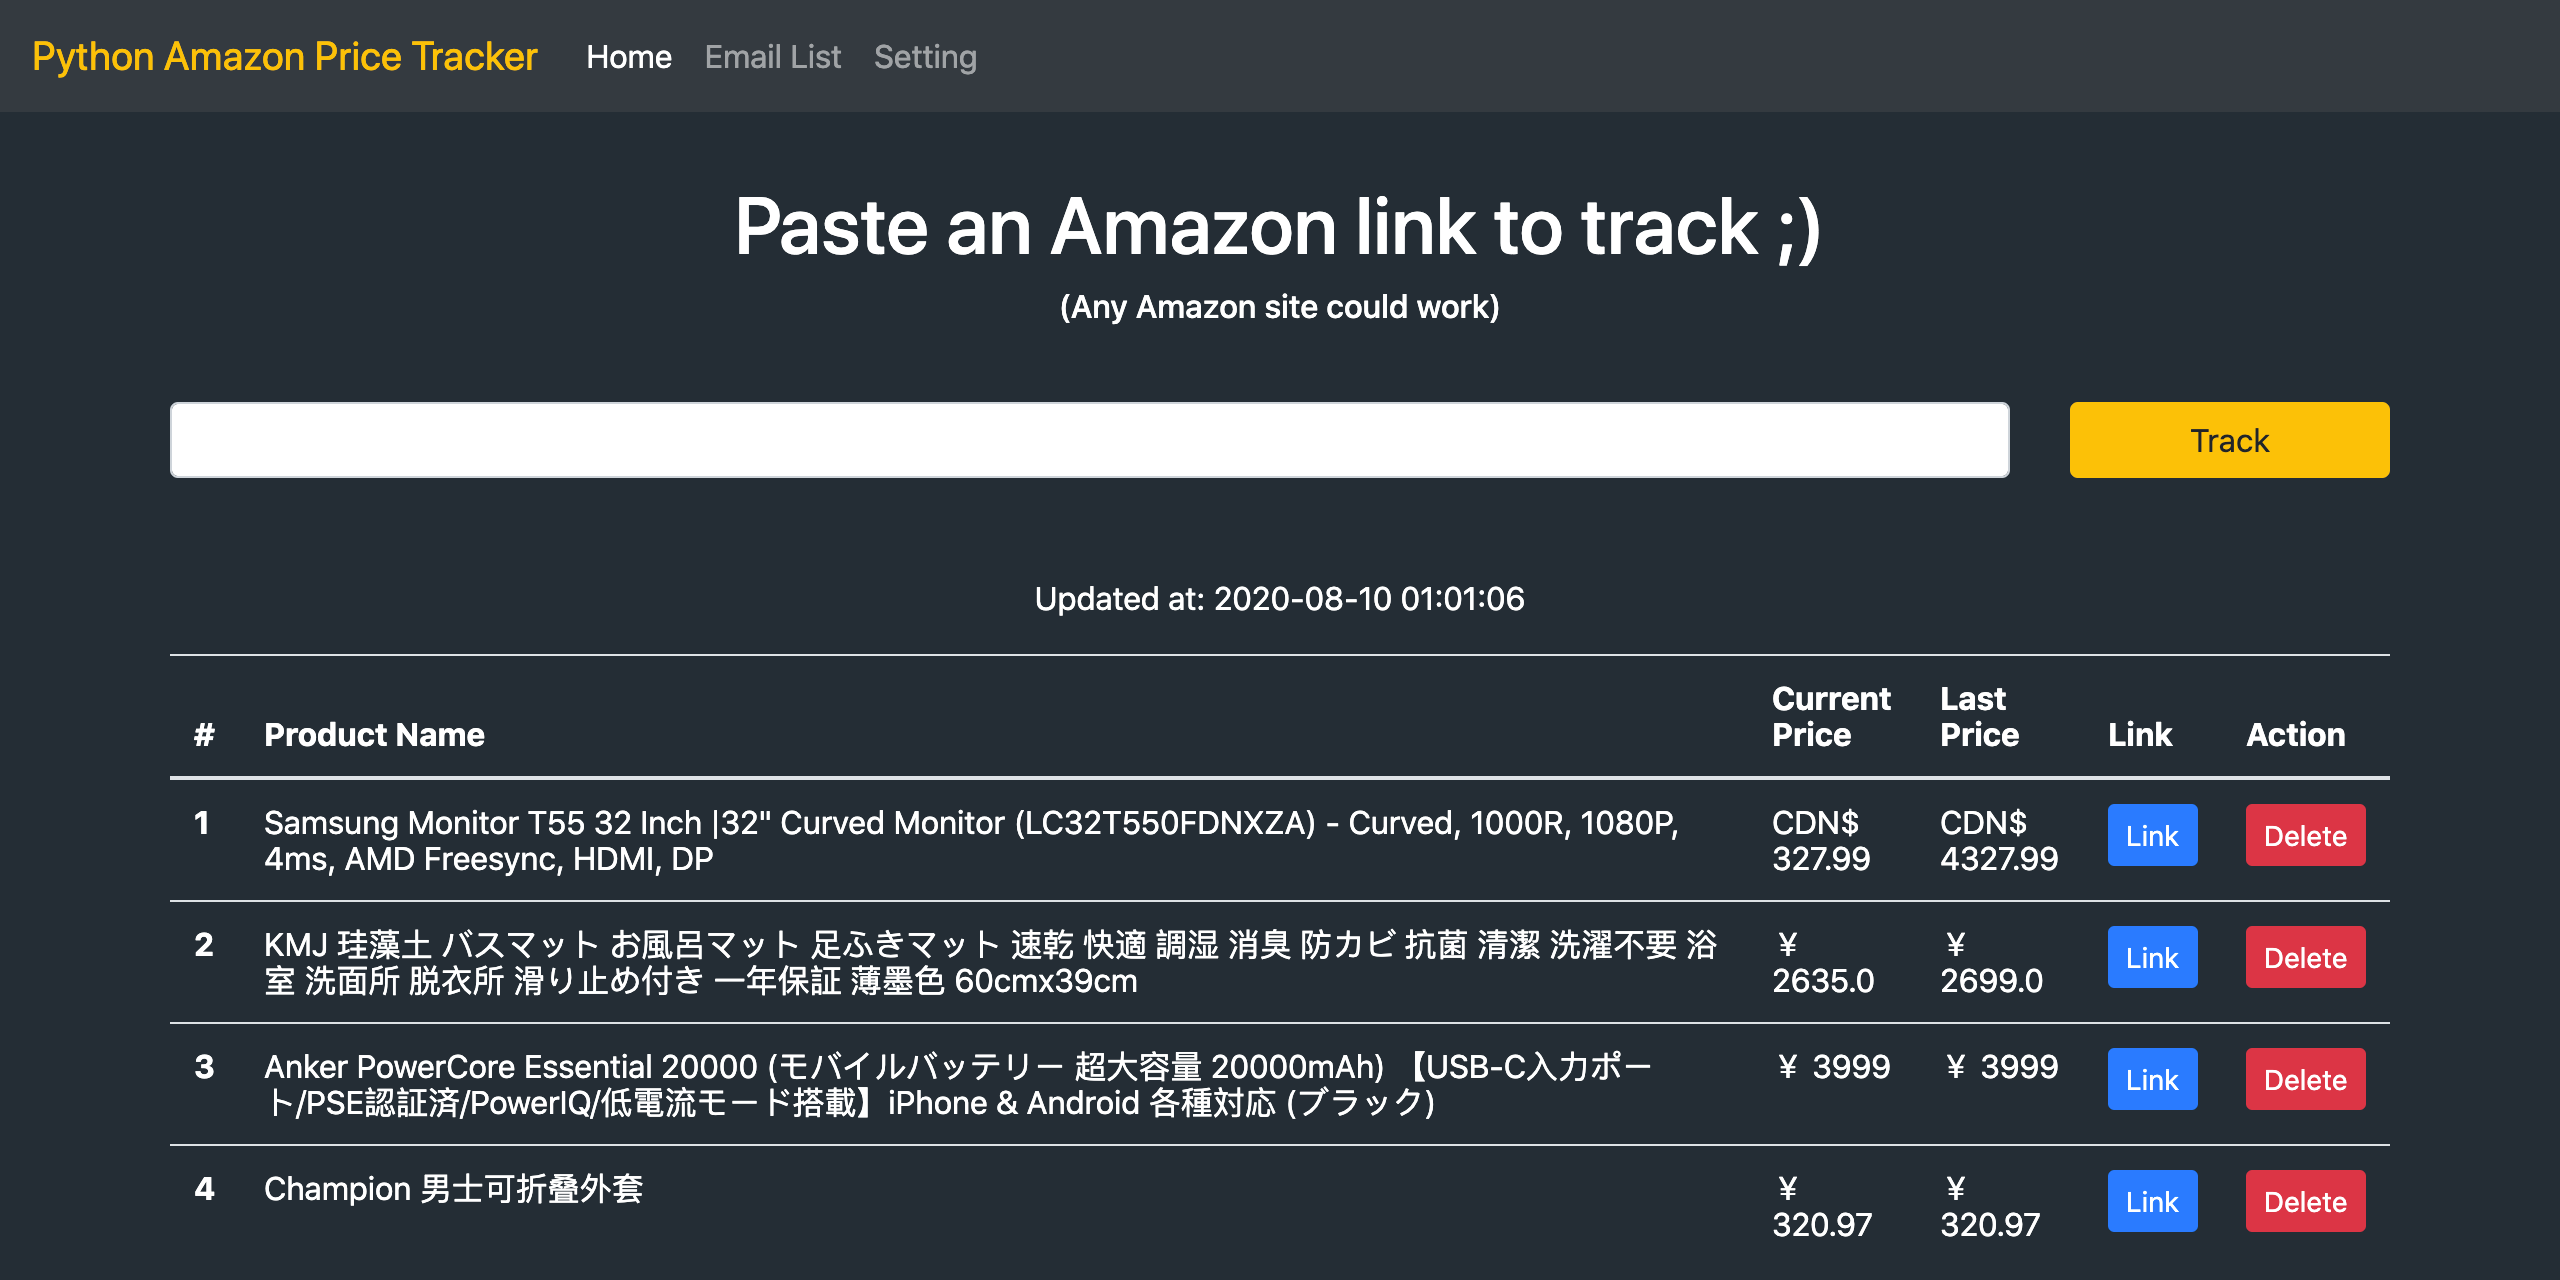 How to create an Amazon Price Tracker using Python